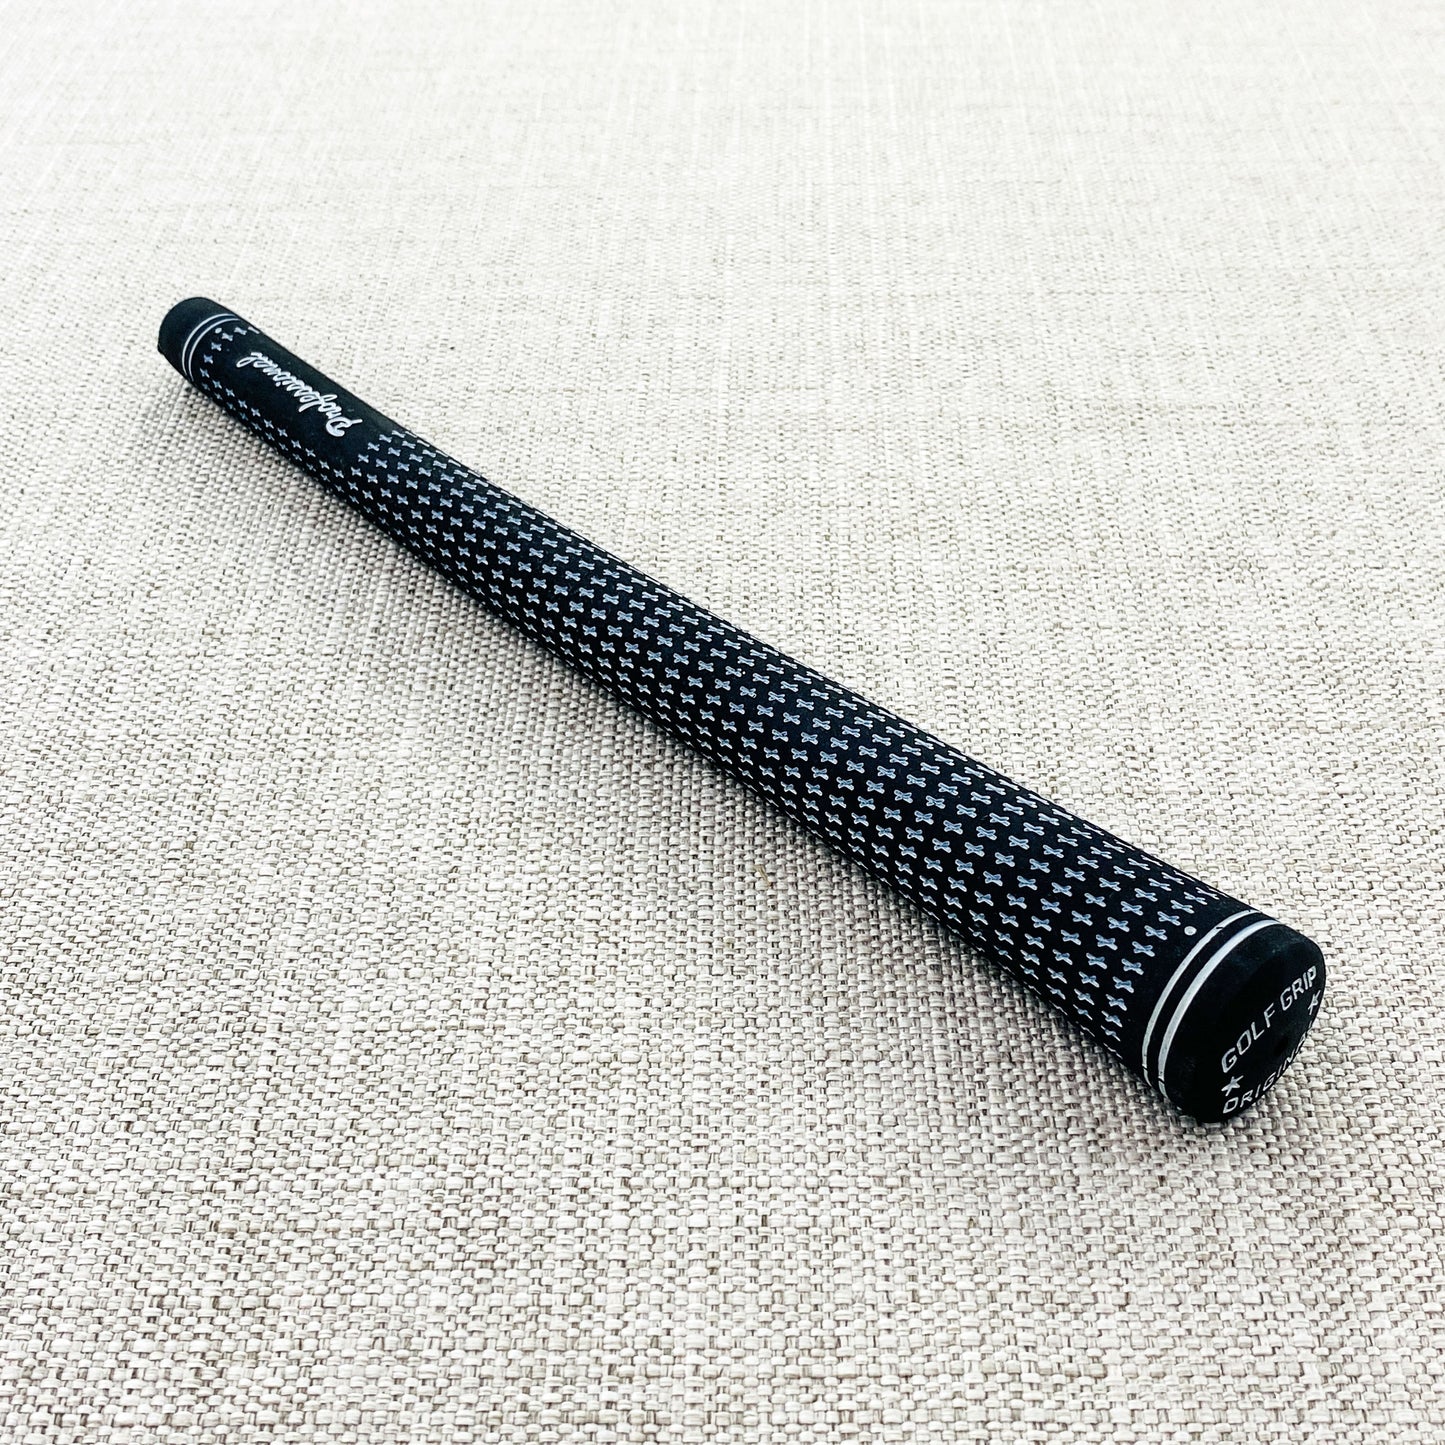 Professional brand budget swing grip. Choice of size. Black/White - Price includes fitment.